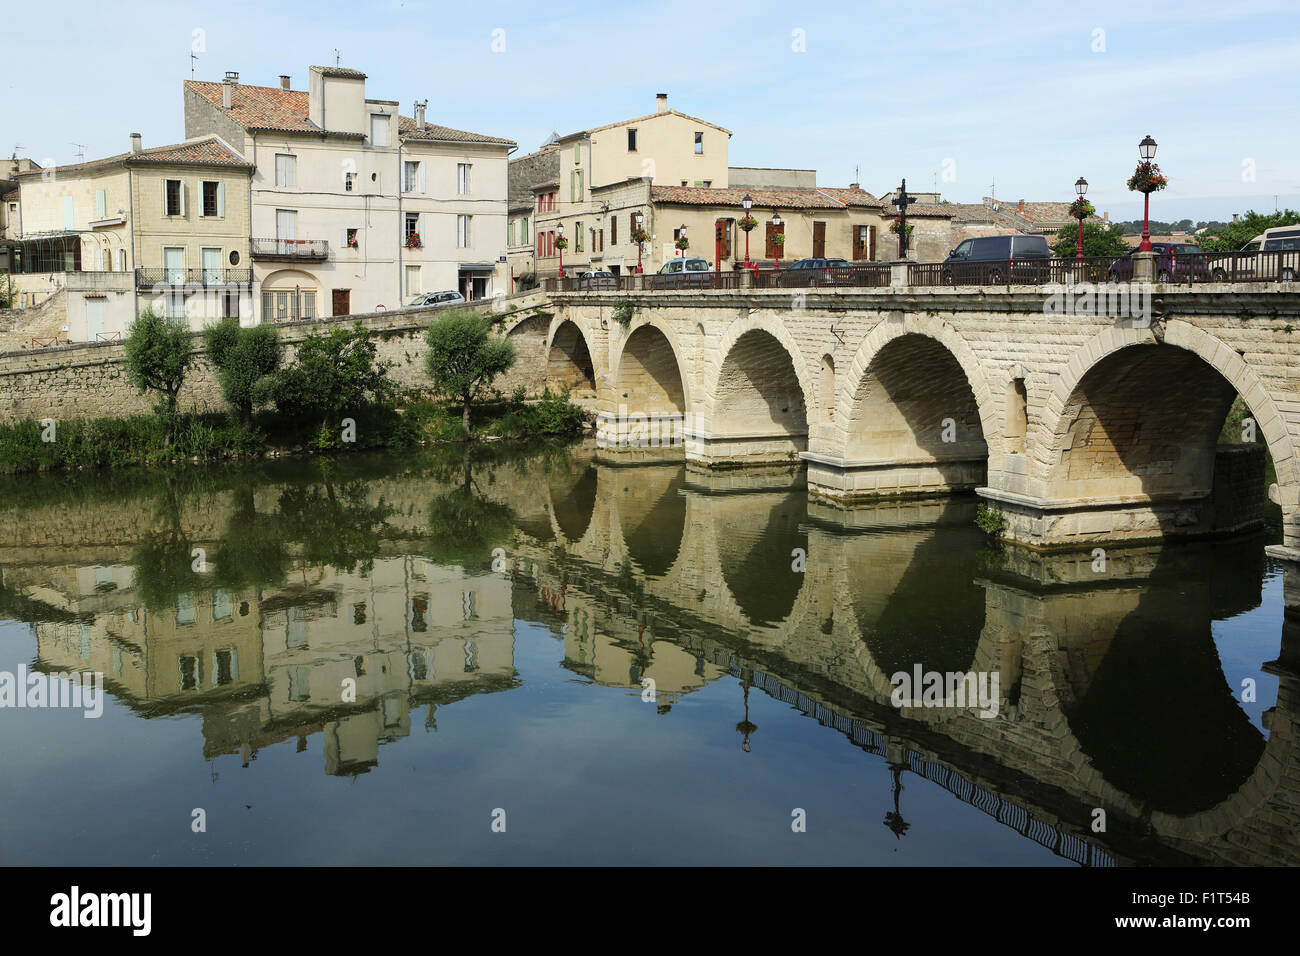 Roman Bridge, built in the reign of Emperor Tiberius, spans the River Vidourle at Sommieres, Gard, Languedoc-Roussillon, France Stock Photo